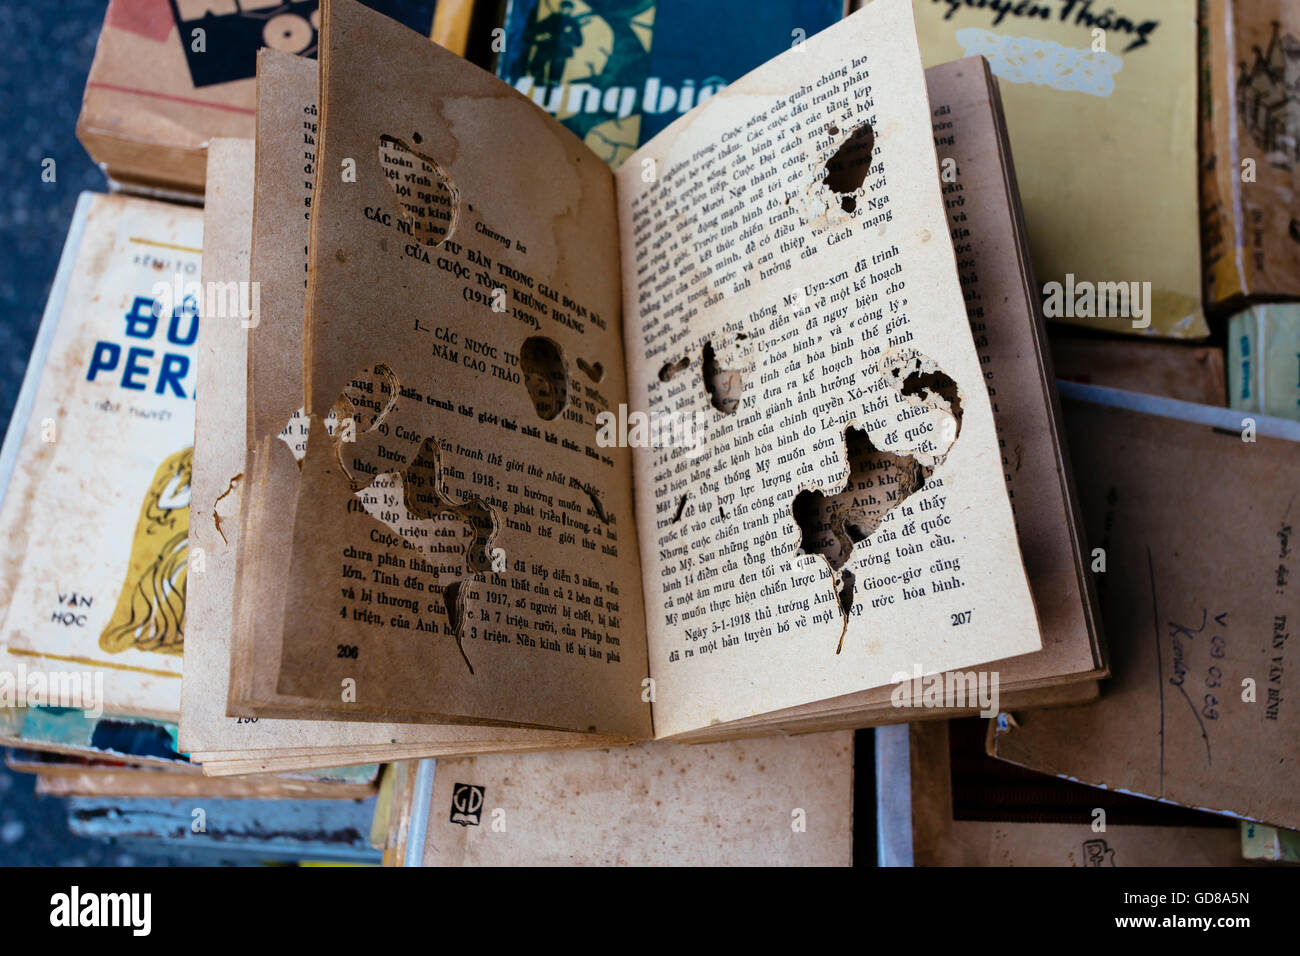 A book at the flea market eaten by bookworms in Vietnam Stock Photo